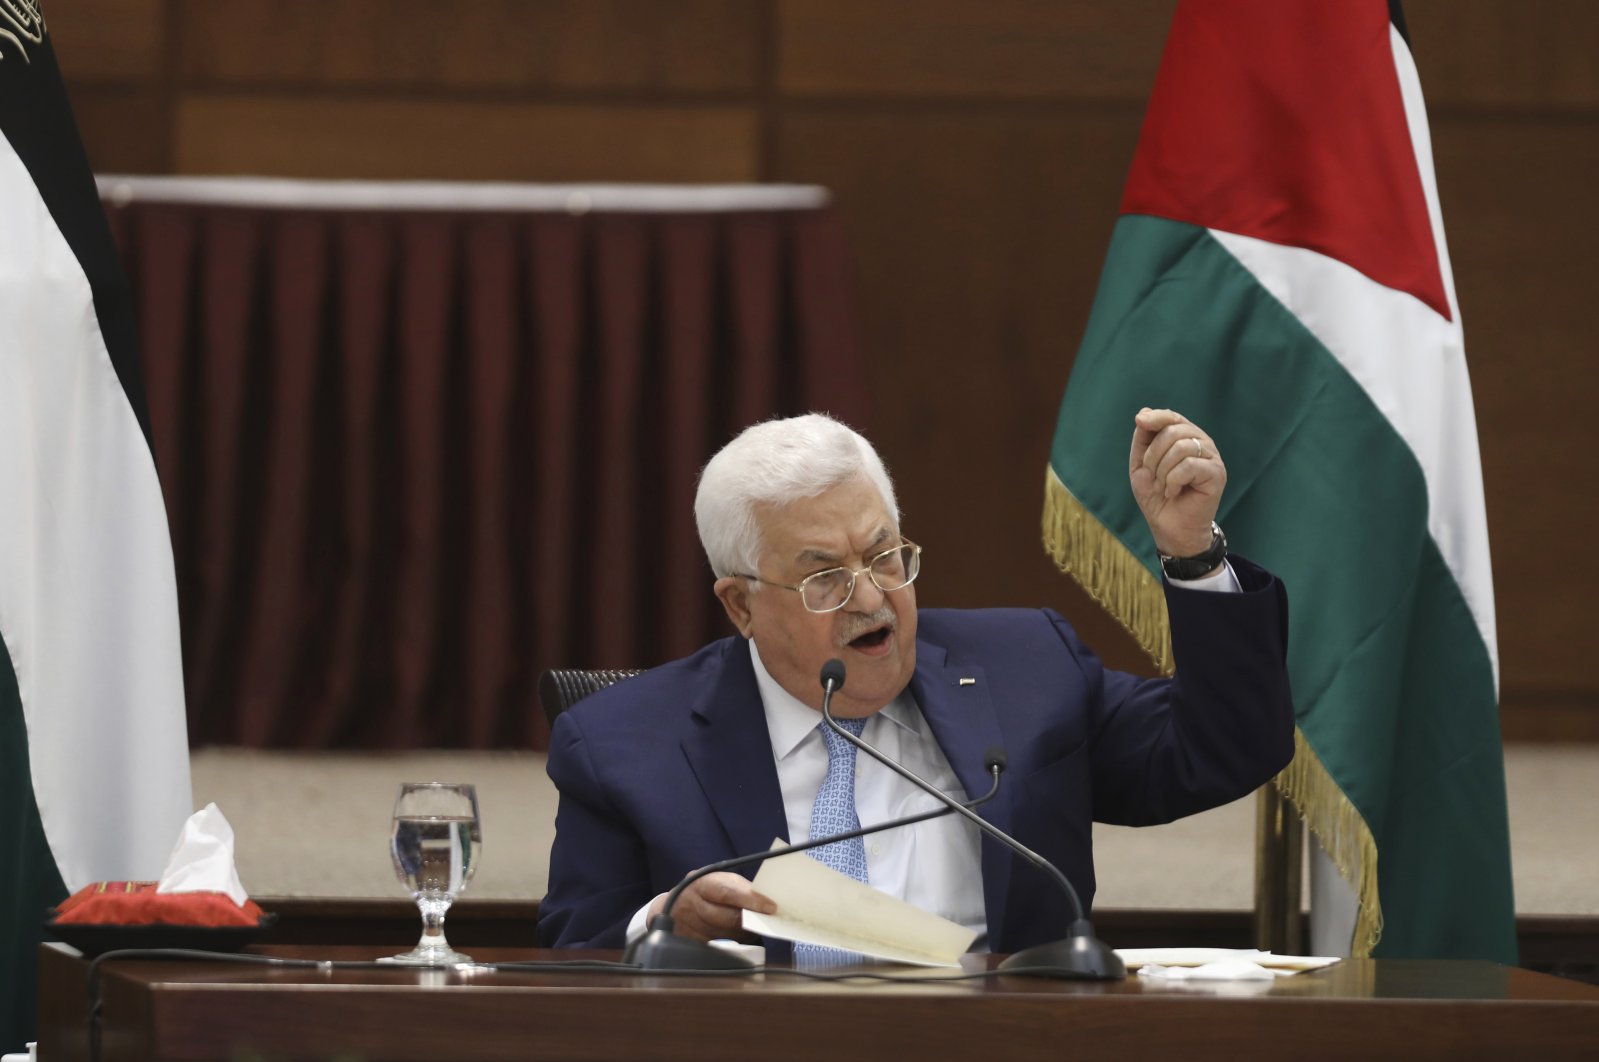 Palestinian President Mahmoud Abbas heads a leadership meeting at his headquarters in the West Bank city of Ramallah, May 19, 2020. (AP Photo)